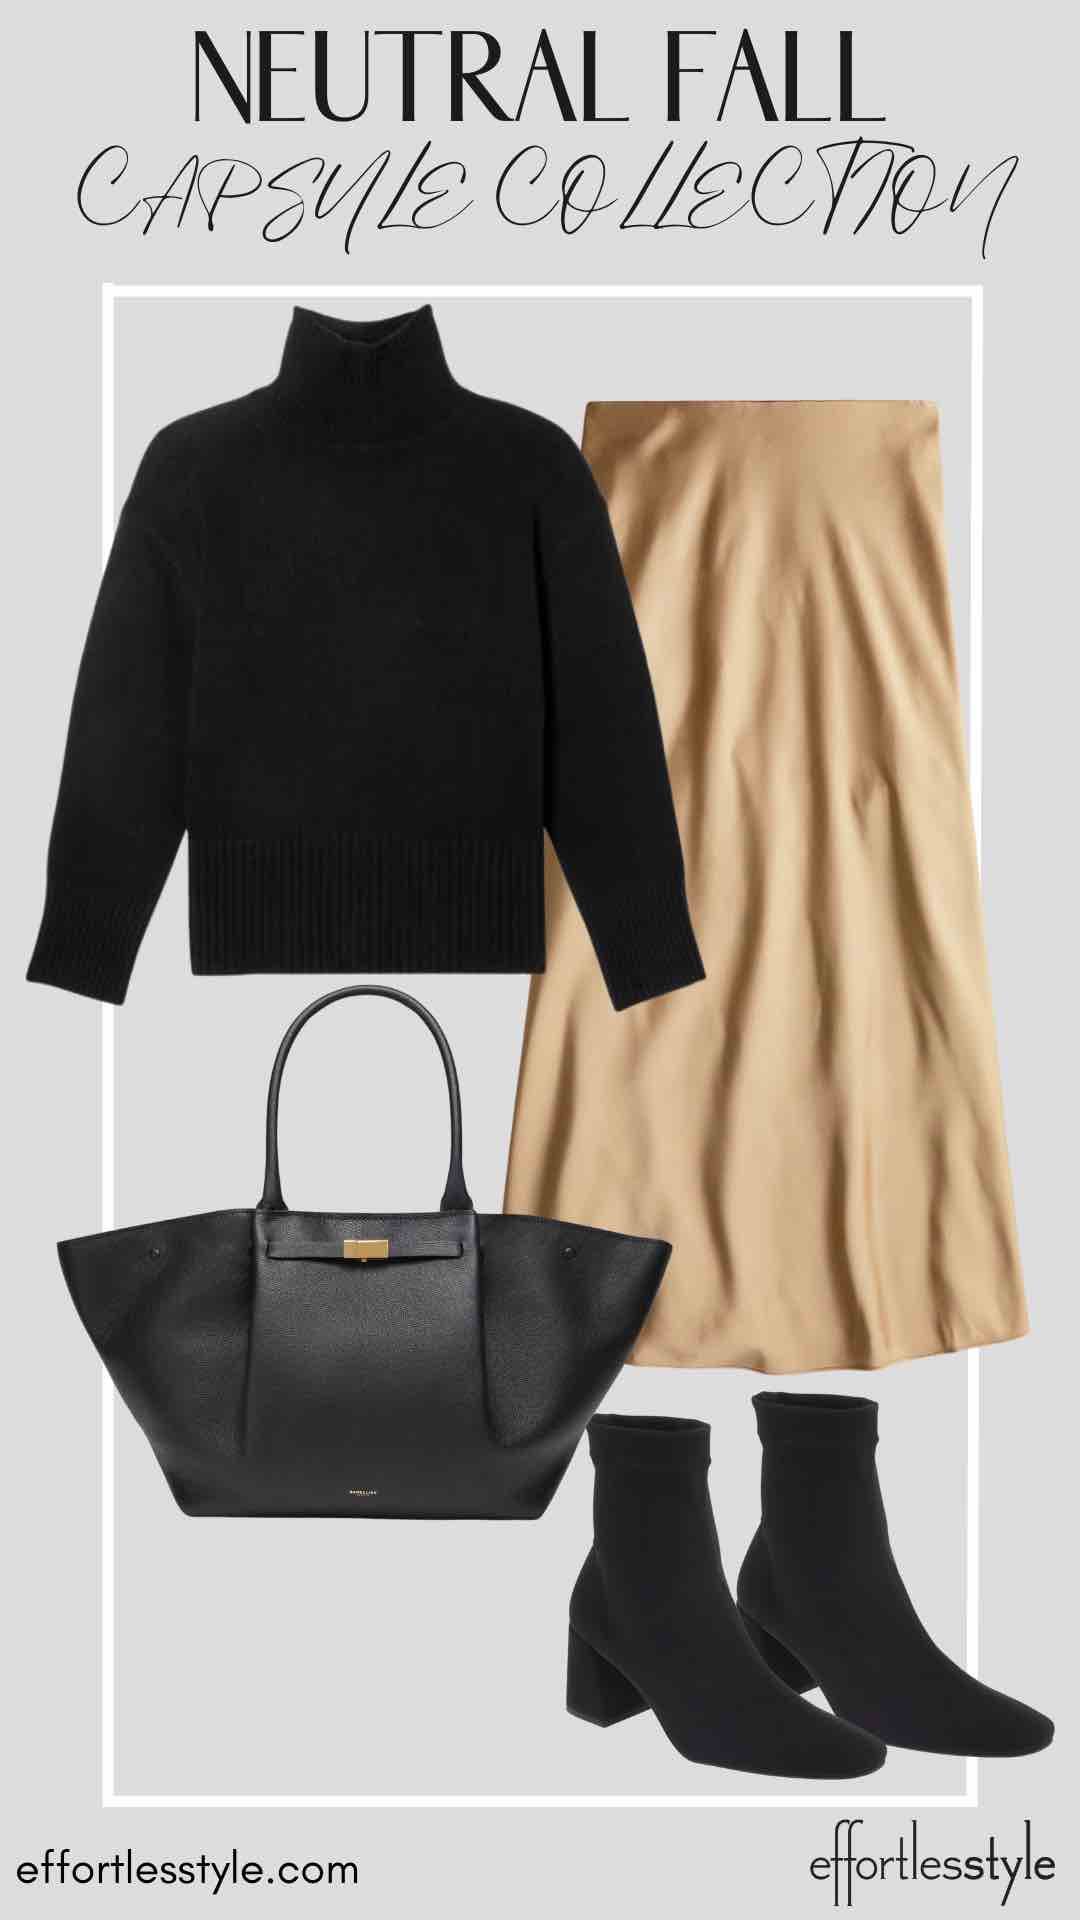 How To Wear Our Neutral Fall Capsule Wardrobe - Part 1 Turtleneck Sweater & Slip Skirt how to wear booties with a slip skirt how to wear camel and black together how to style a sweater with a slip skirt fun ways to style a slip skirt for fall how to wear brown and black together how to mix brown and black